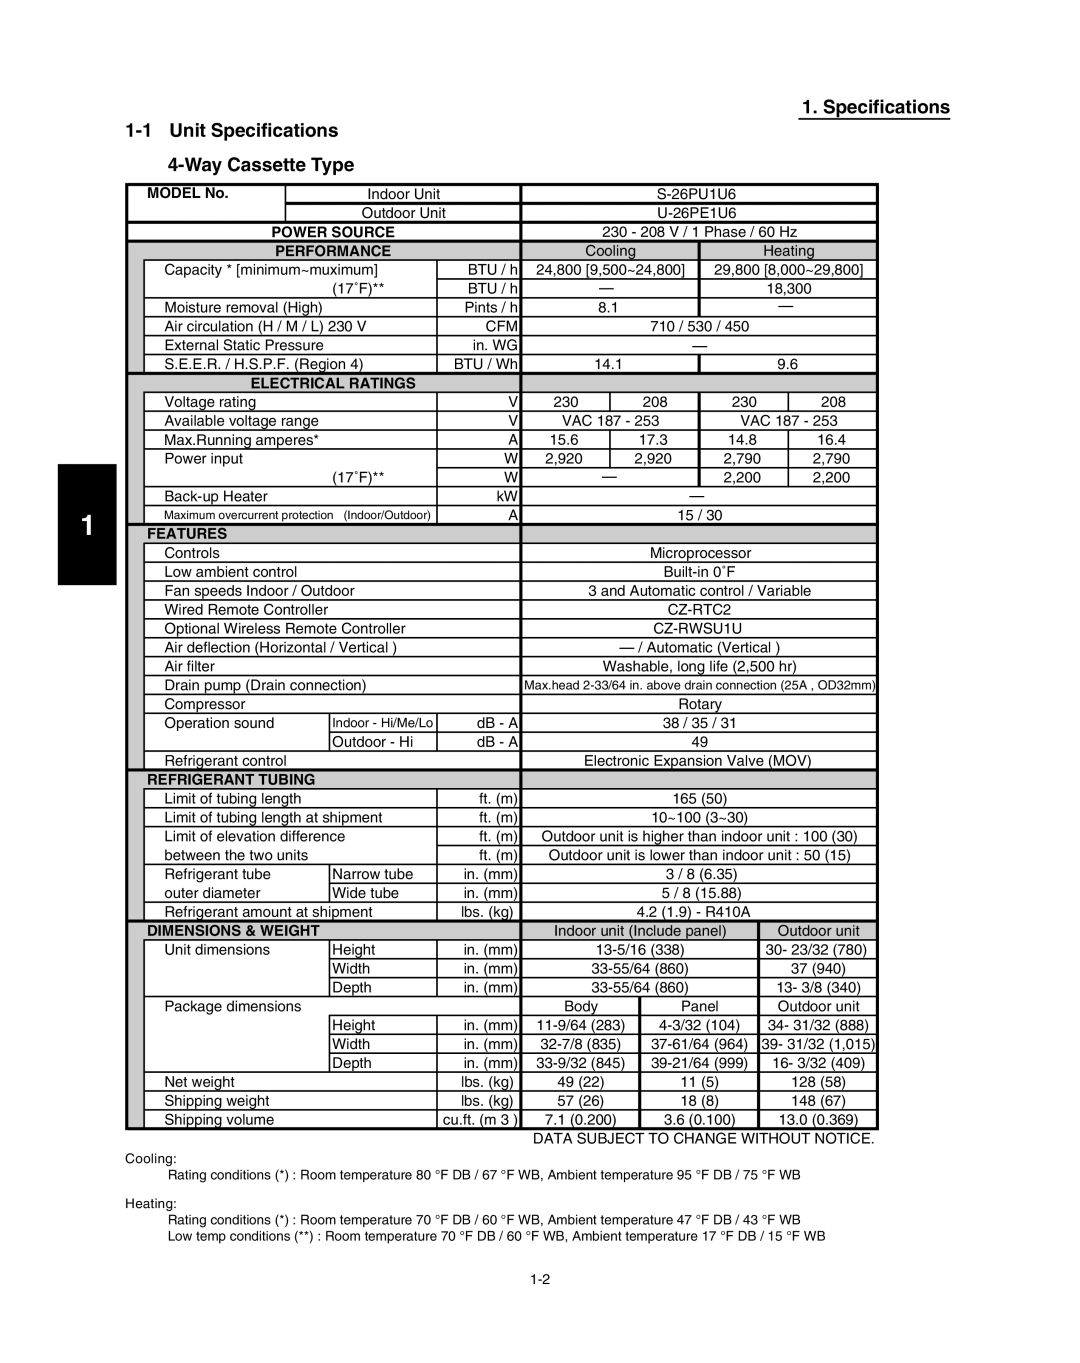 Panasonic R410A service manual Specifications 1-1Unit Specifications, WayCassette Type, MODEL No, Power Source, Features 